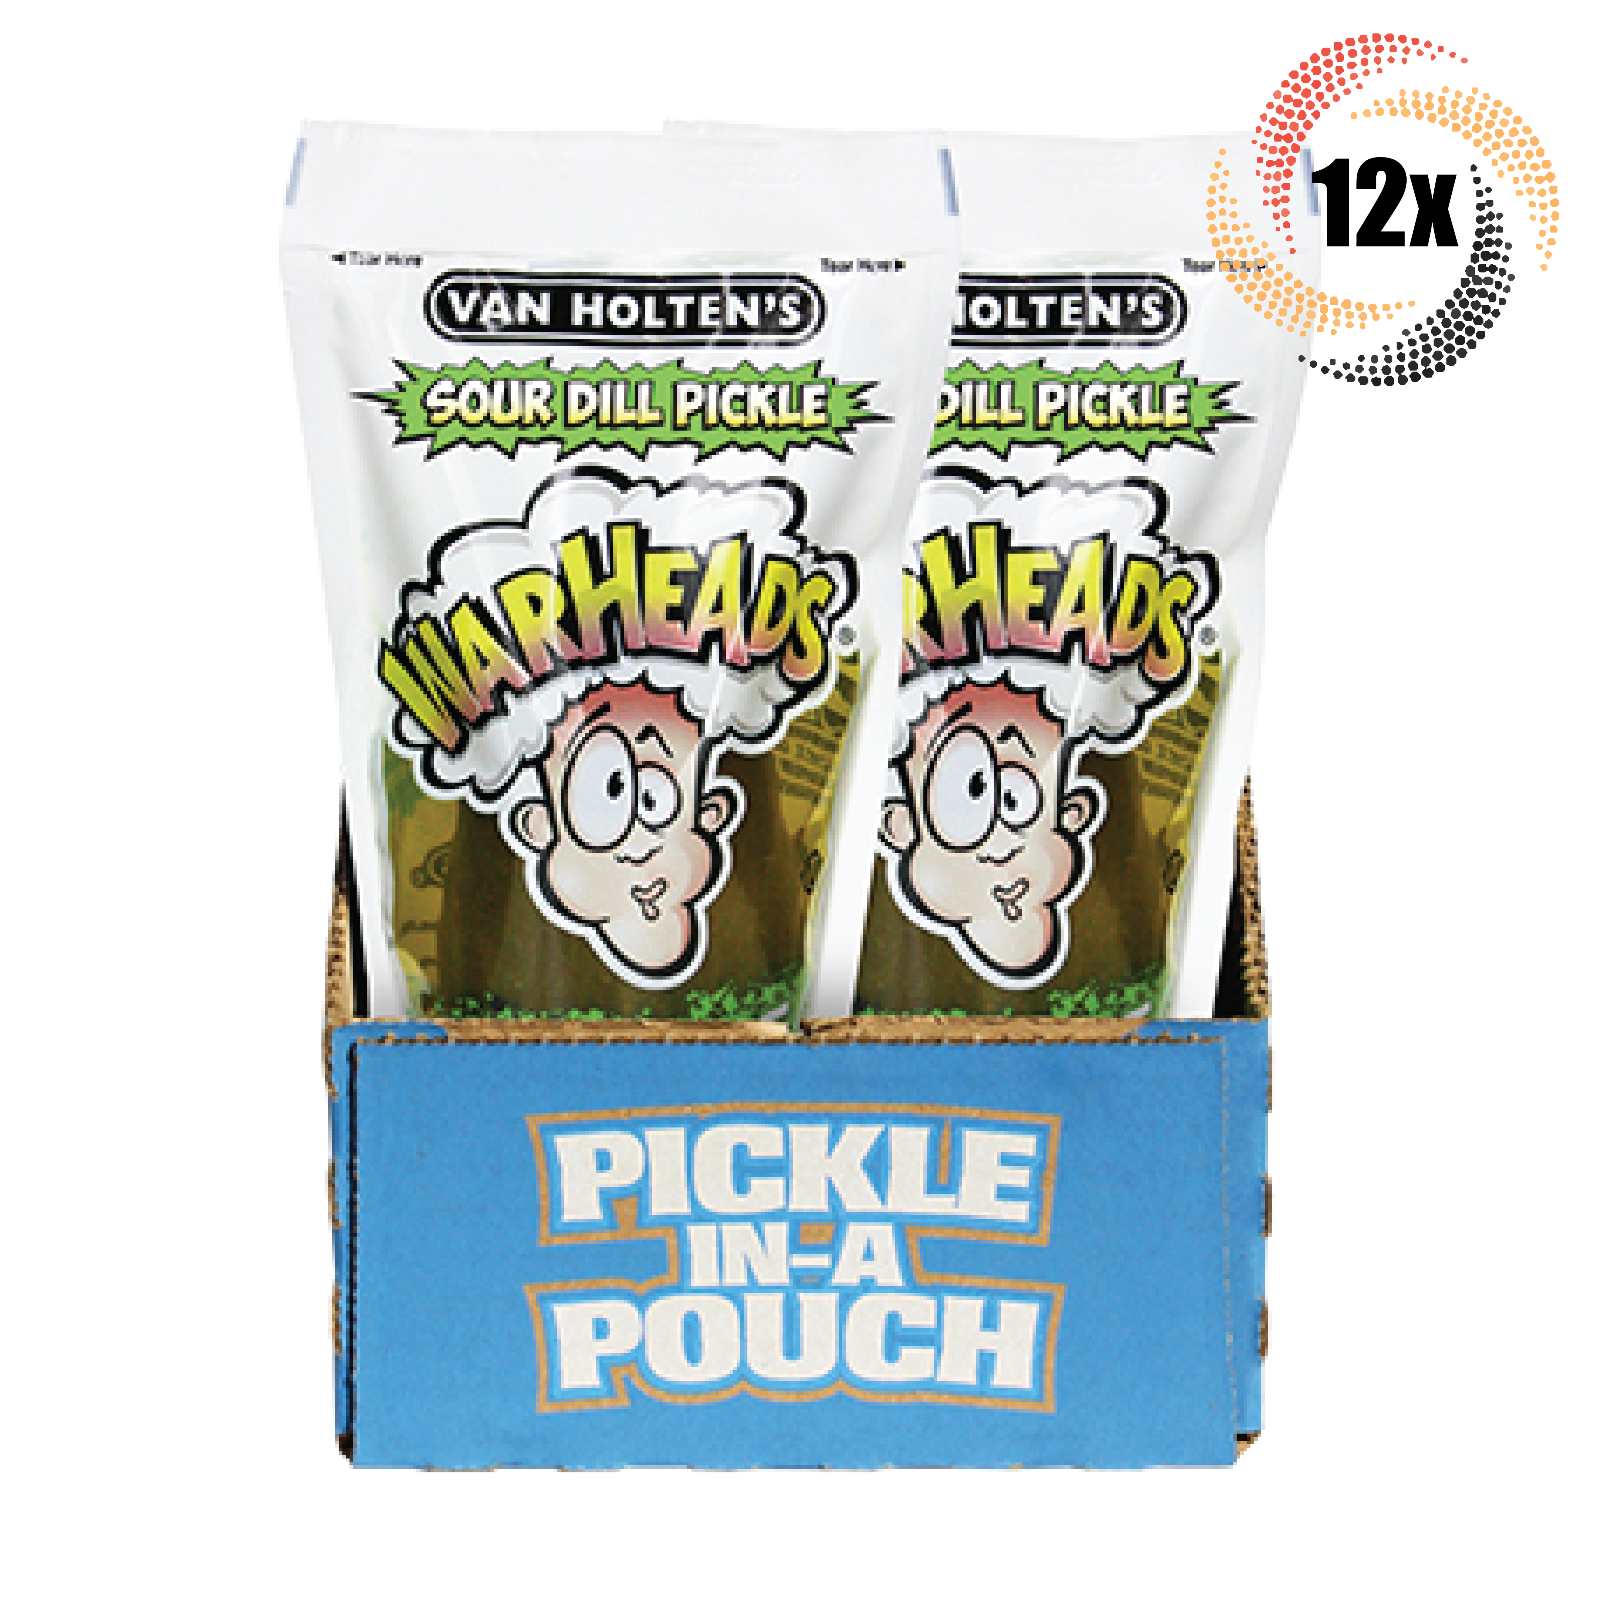 Primary image for Full Box 12x Pouches Van Holten's Warheads Sour Jumbo Dill Pickle In Pouch | 5oz